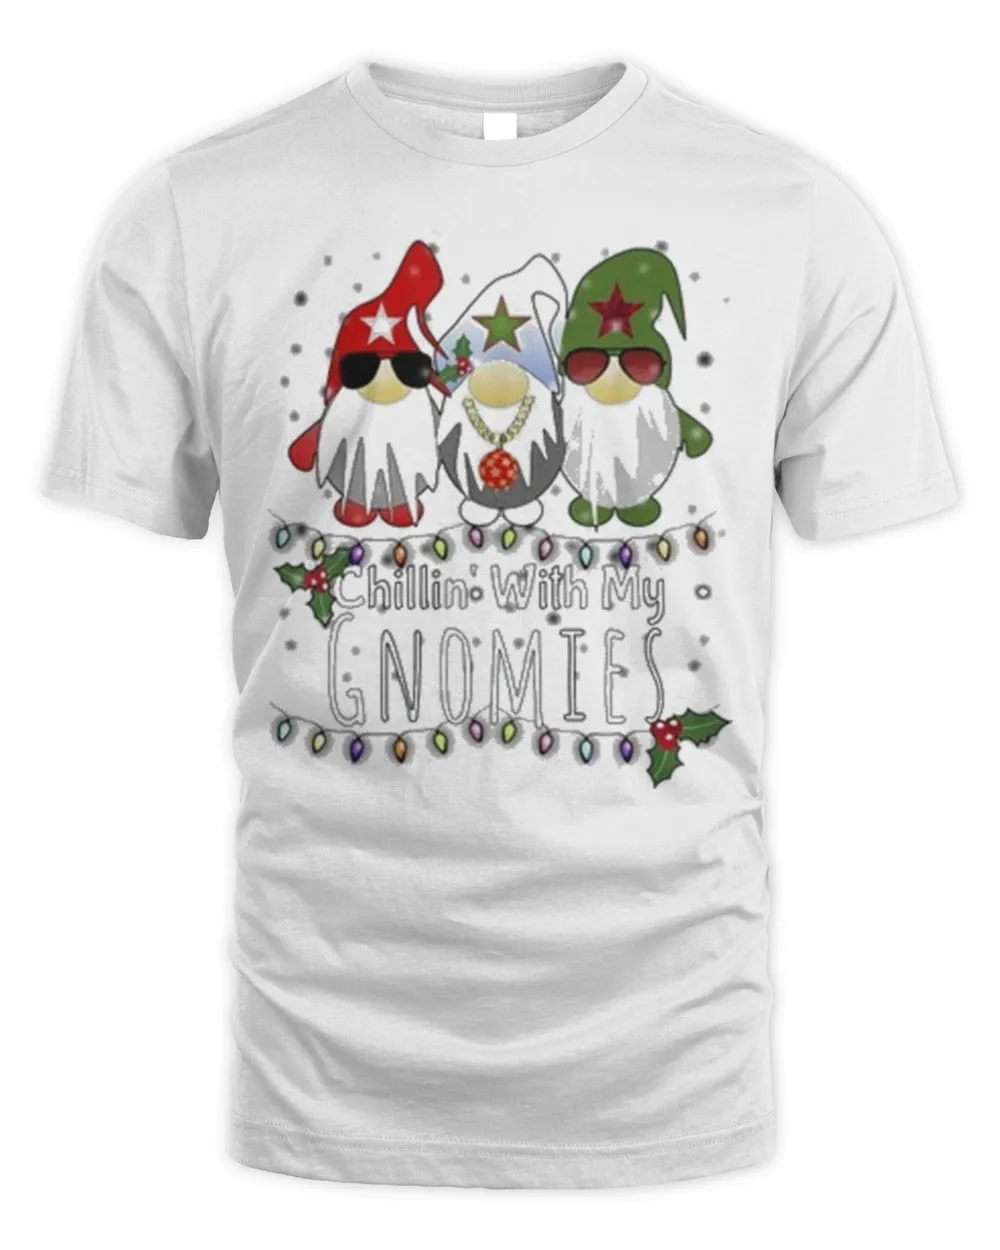 Chilling with My Gnomies Christmas Shirt